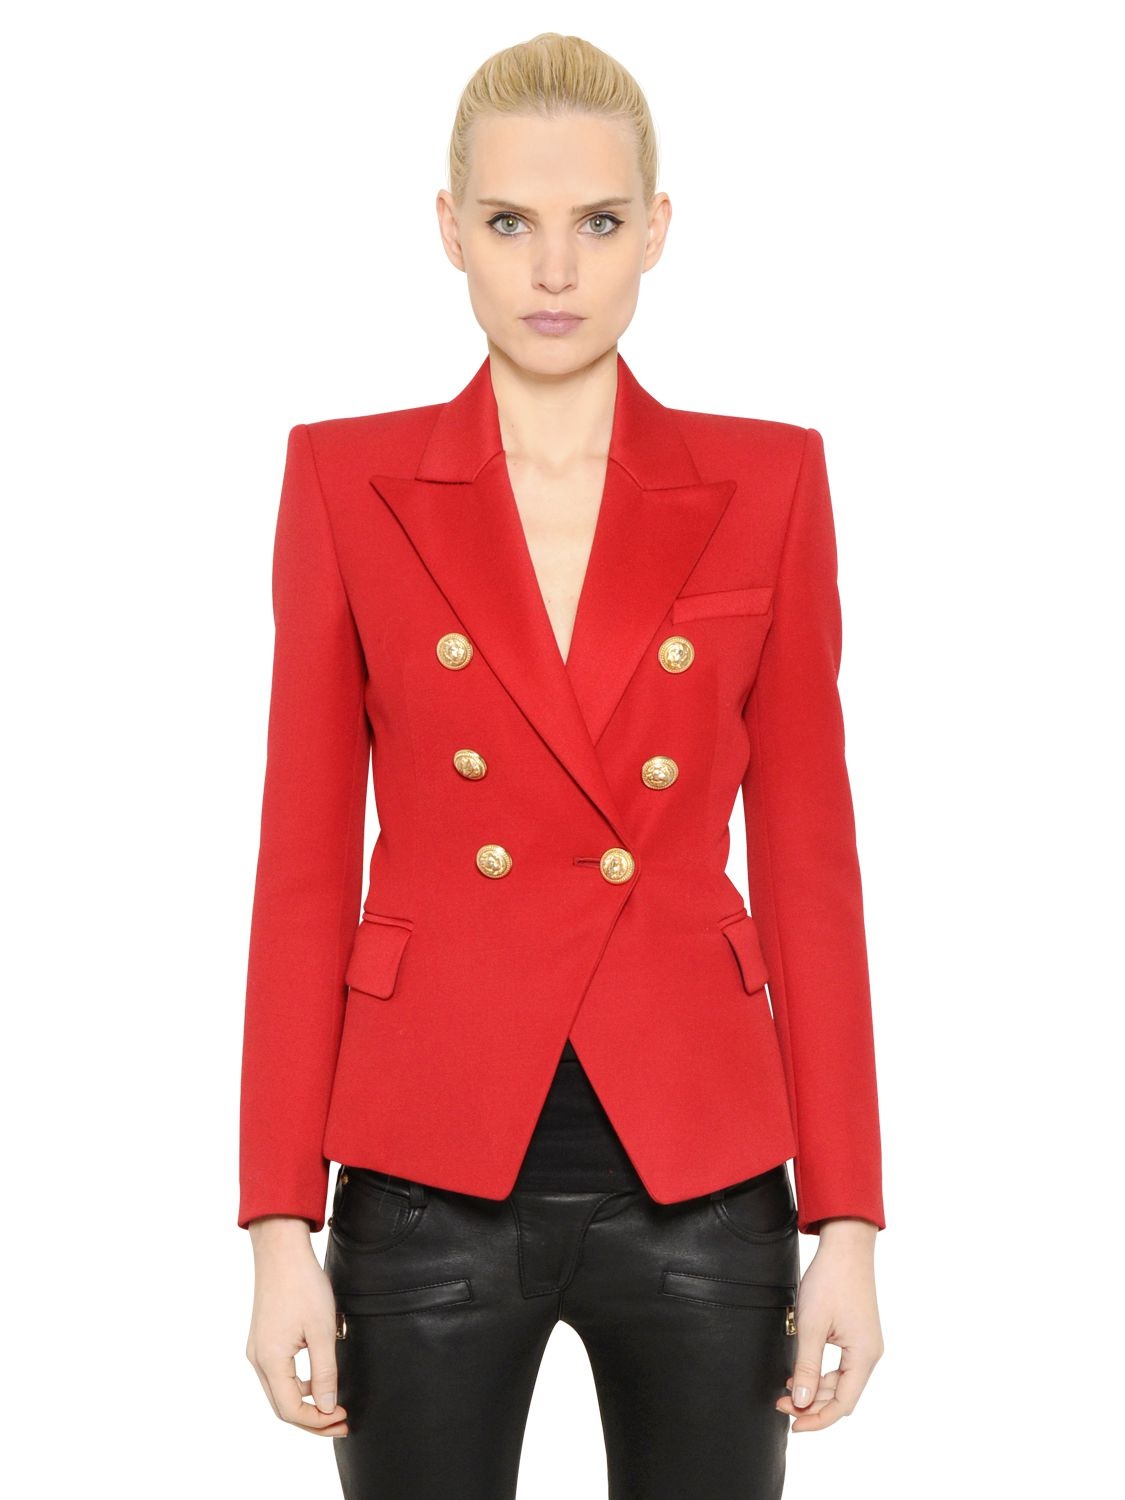 Balmain Double Breasted Wool Twill Jacket in Red - Lyst